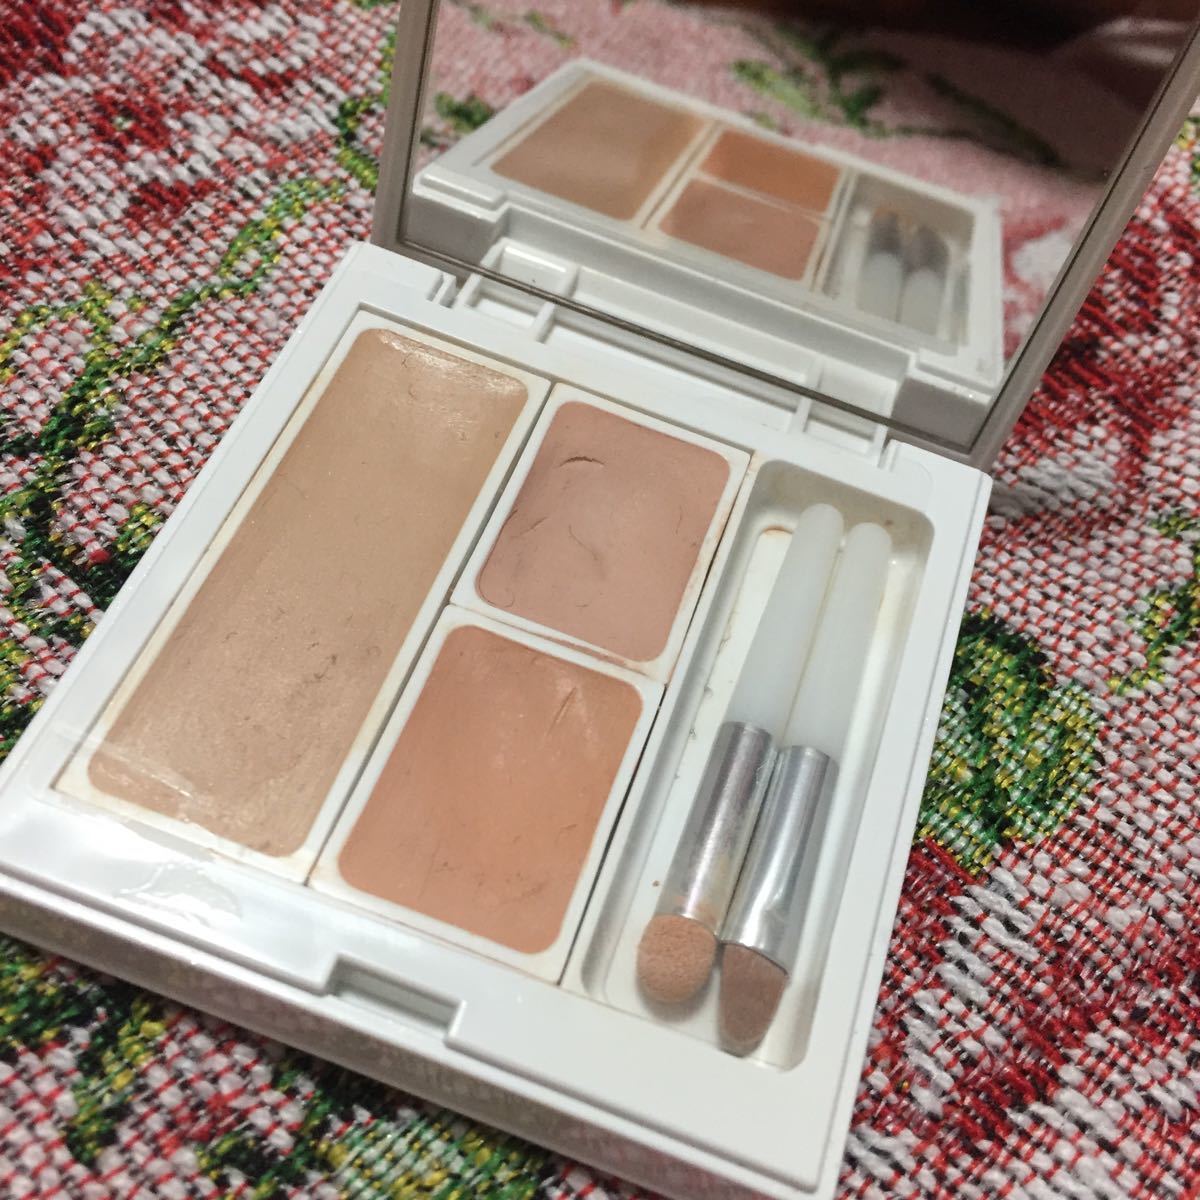 MIMC M I.M si- natural whitening concealer beige pink orange beautiful white concealer tax included 6000 jpy 